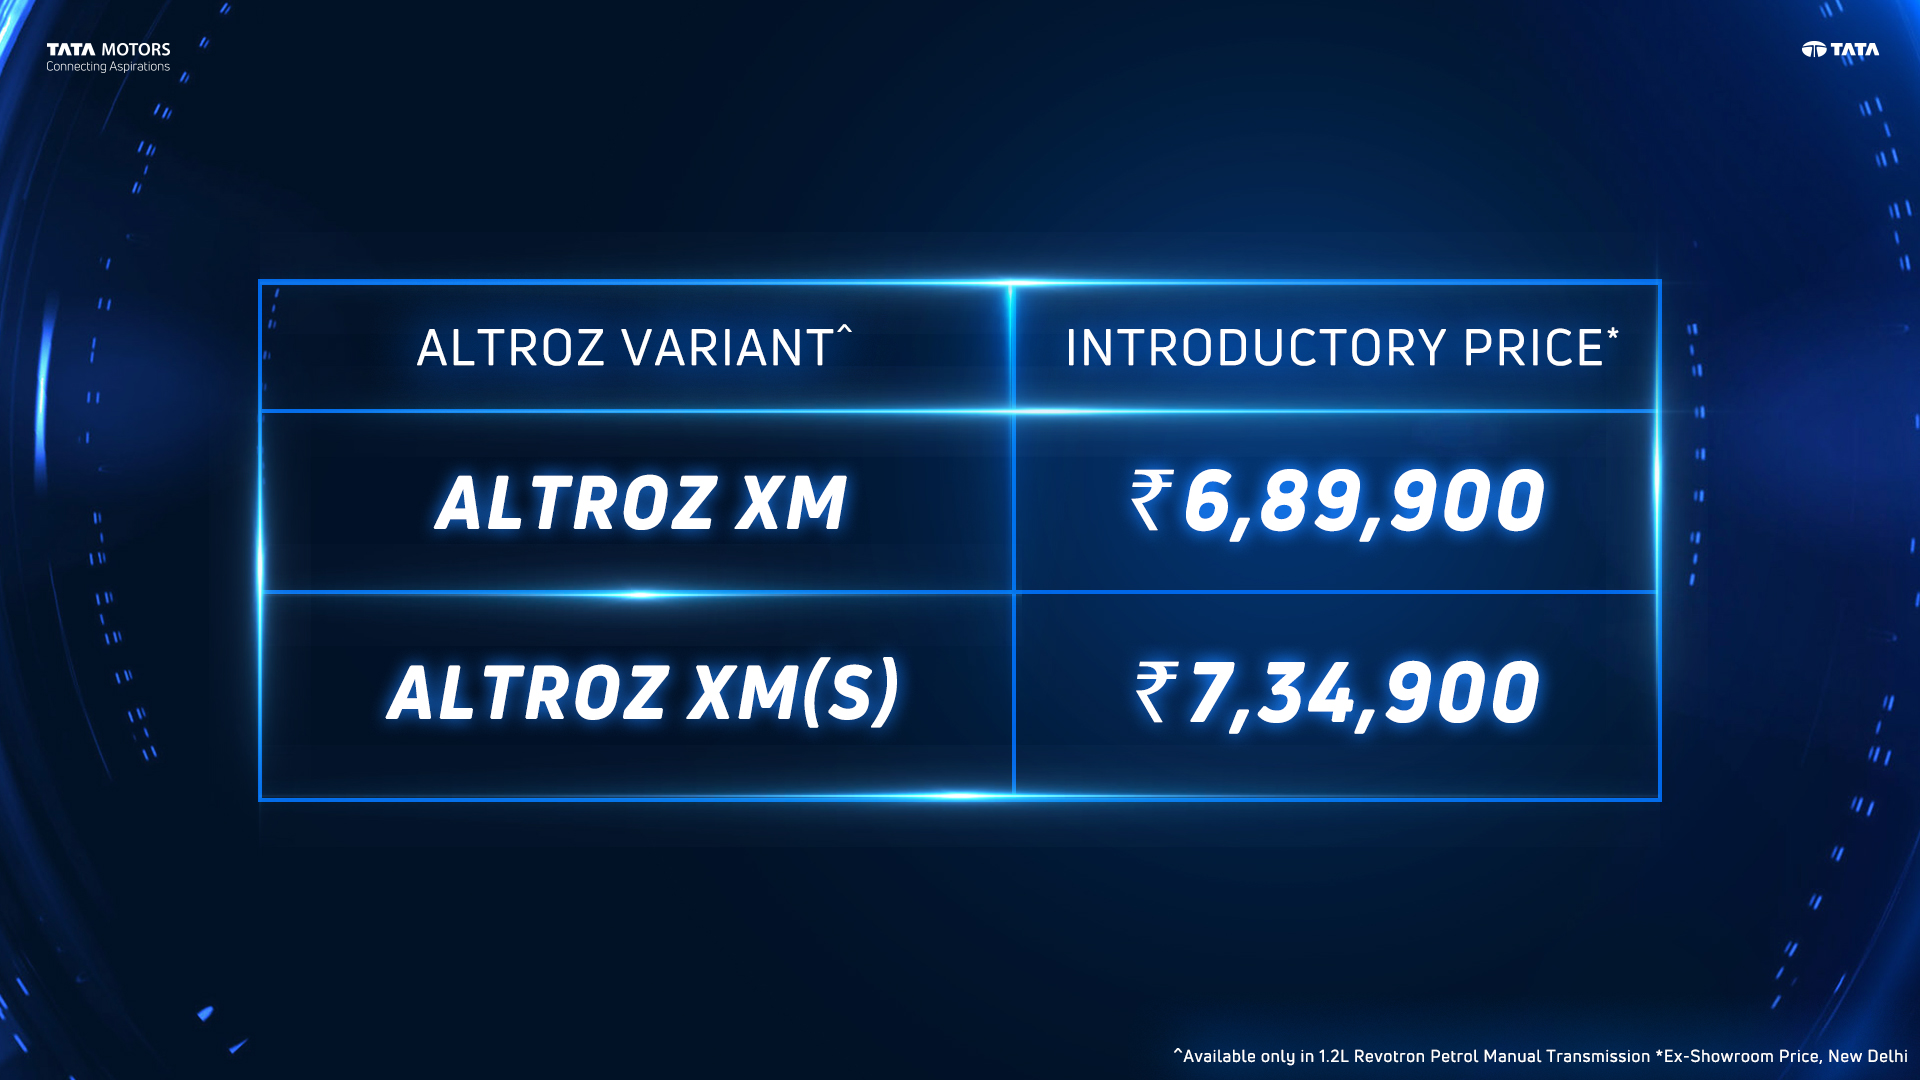 Tata Motors today announced the launch of two new variants in the Altroz line up, the XM and XM(S)